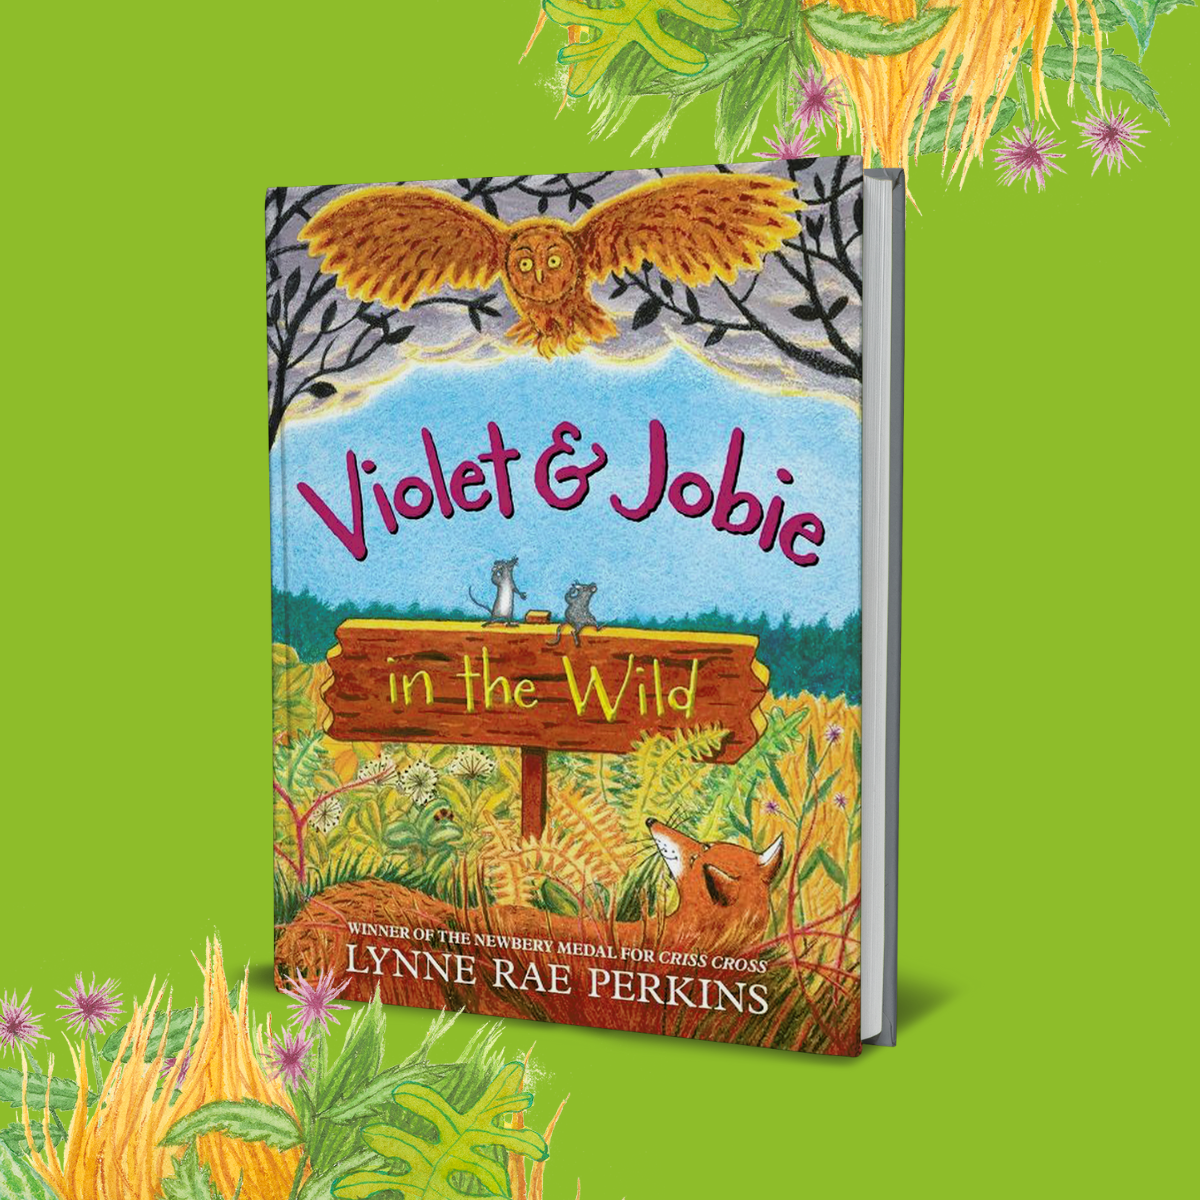 Book cover of Violet and Jobie in the Wild By Lynne Rae Perkins on a green background. 